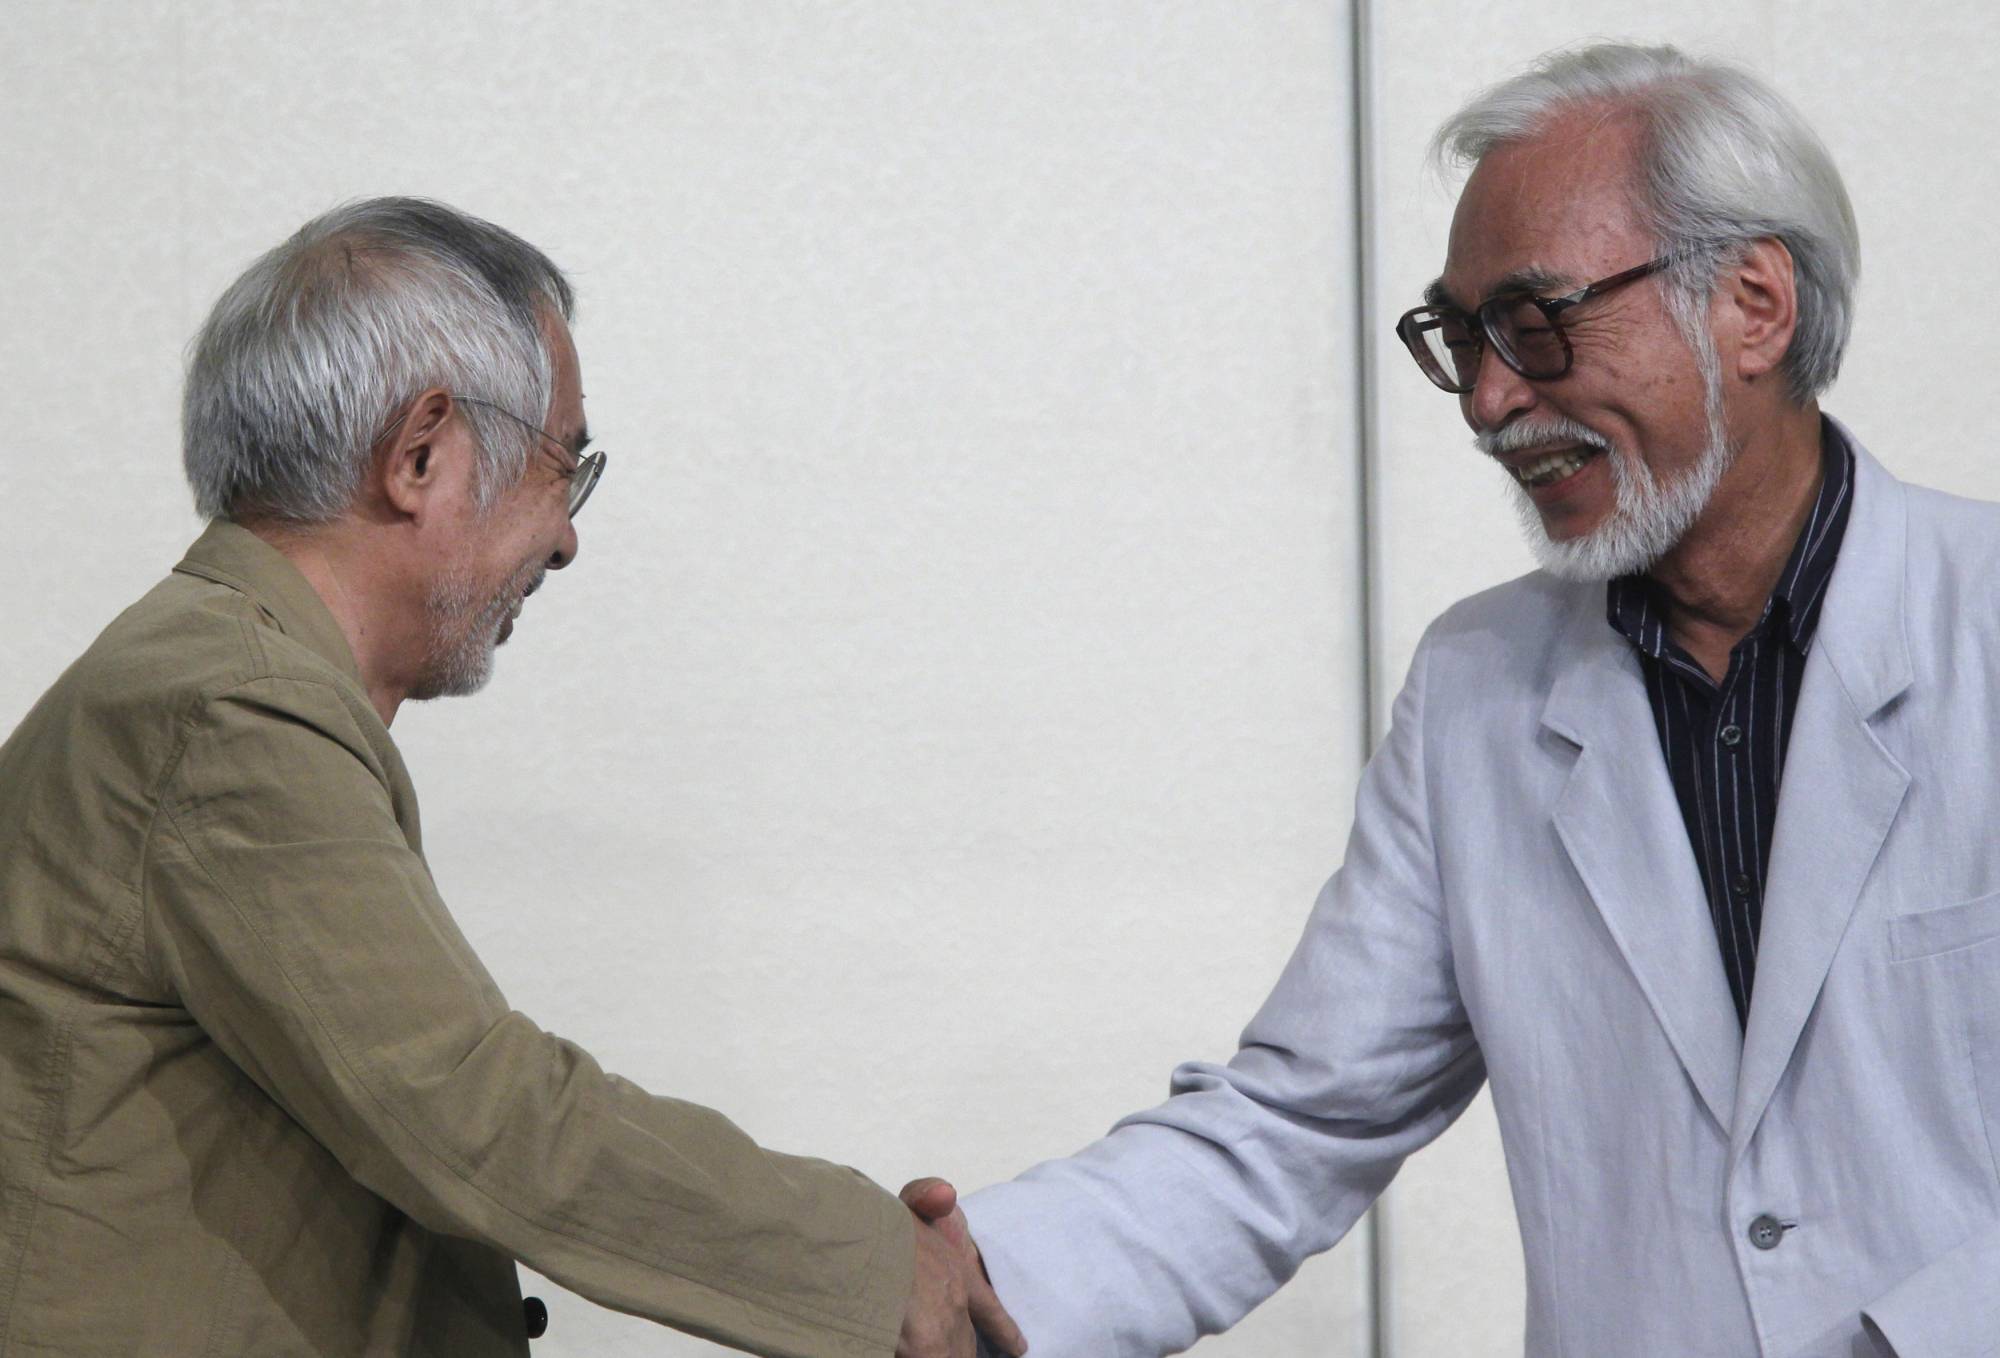 Japanese director Hayao Miyazaki (right) shakes hands with Studio Ghibli Chairman and Producer Toshio Suzuki during a news conference held to announce his retirement from film in 2013. | REUTERS